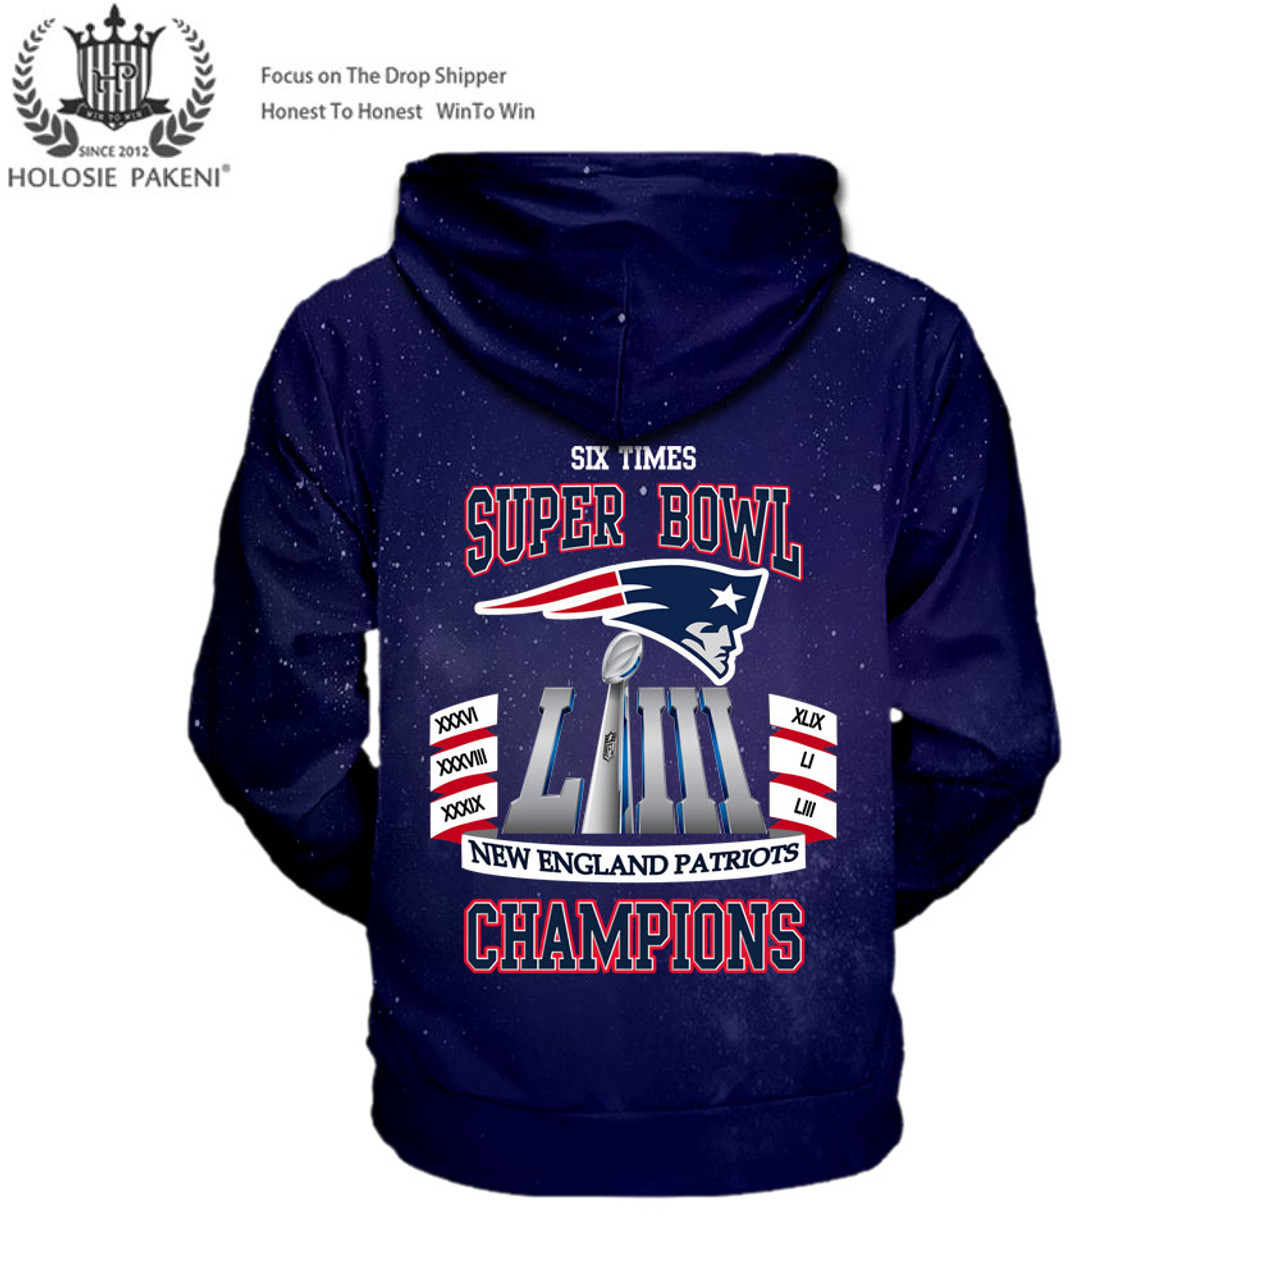  **(OFFICIAL-N.F.L.NEW-ENGLAND-PATRIOTS-SUPER-BOWL-CHAMPIONS-PULLOVER-HOODIES/NEW-CUSTOM-3D-GRAPHIC-PRINTED-DOUBLE-SIDED-DESIGNED/ALL-OVER-OFFICIAL-PATRIOTS-LOGOS & IN-PATRIOTS-TEAM-COLORS/WARM-PREMIUM-OFFICIAL-N.F.L.PATRIOTS-TEAM-PULLOVER-HOODIES)**